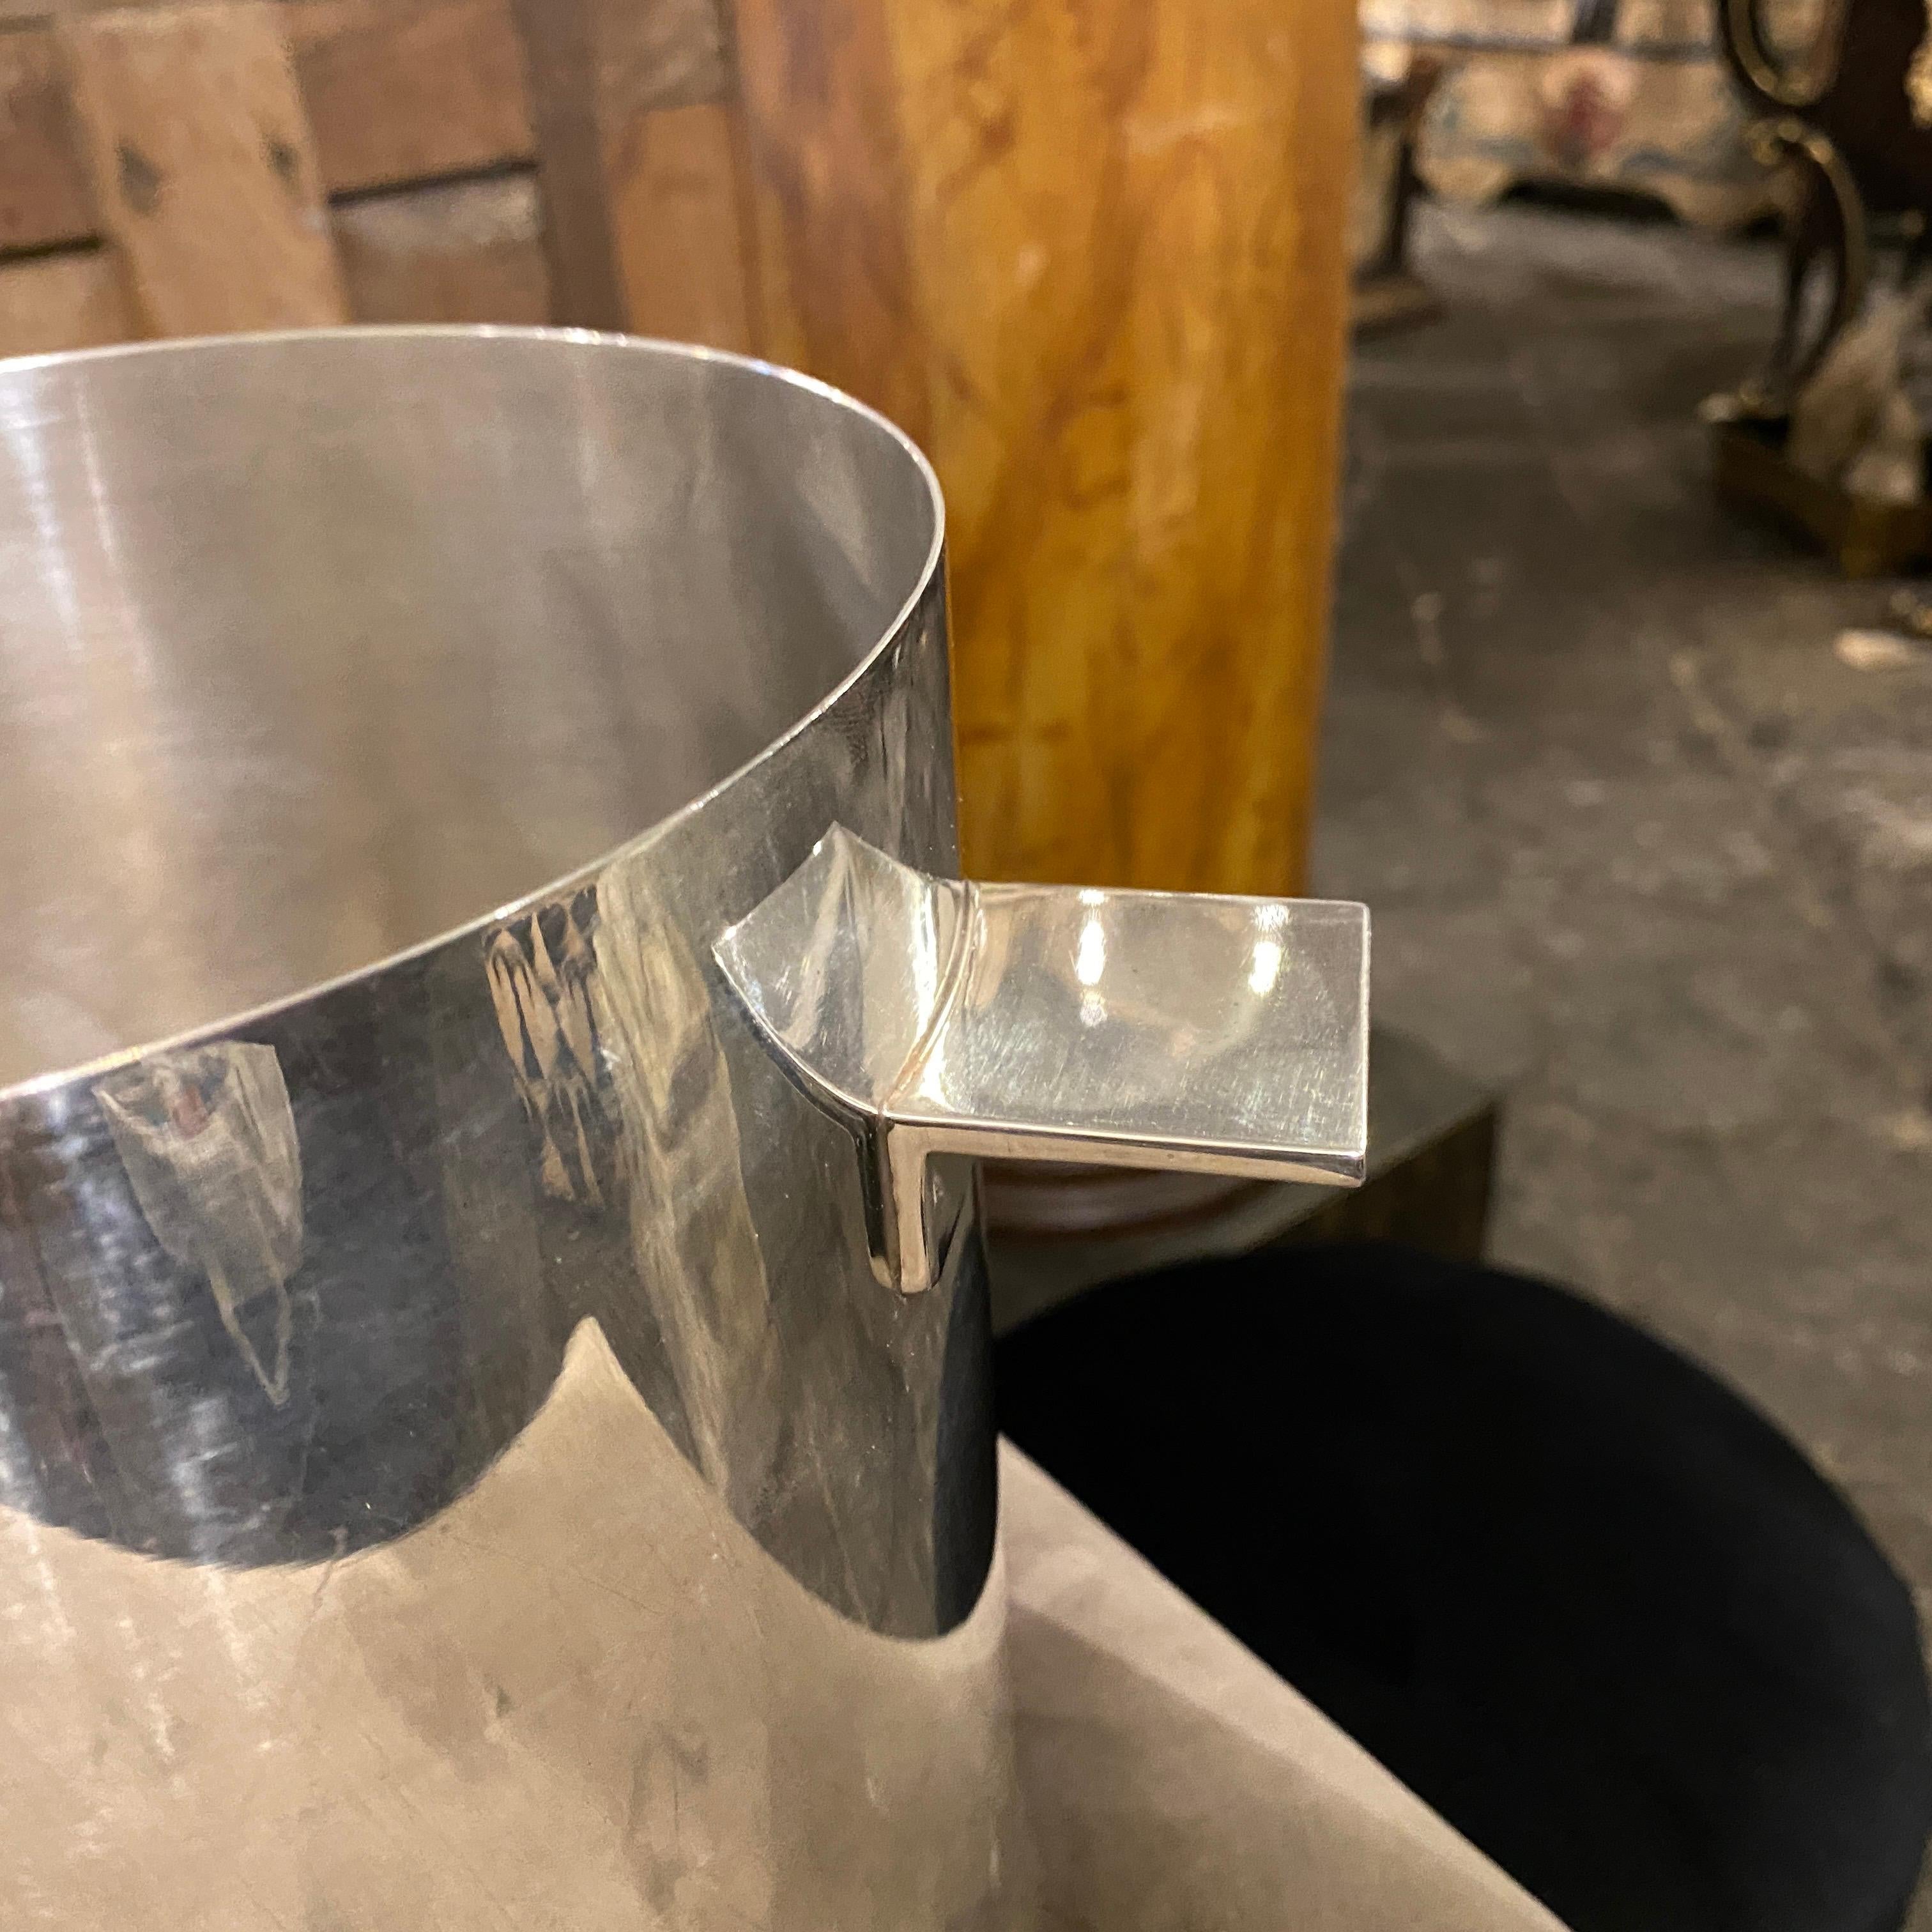 An iconic silver plated wine cooler made in France by Christofle, designed by Lino Sabattini. It's in good vintage conditions, marked on the bottom.